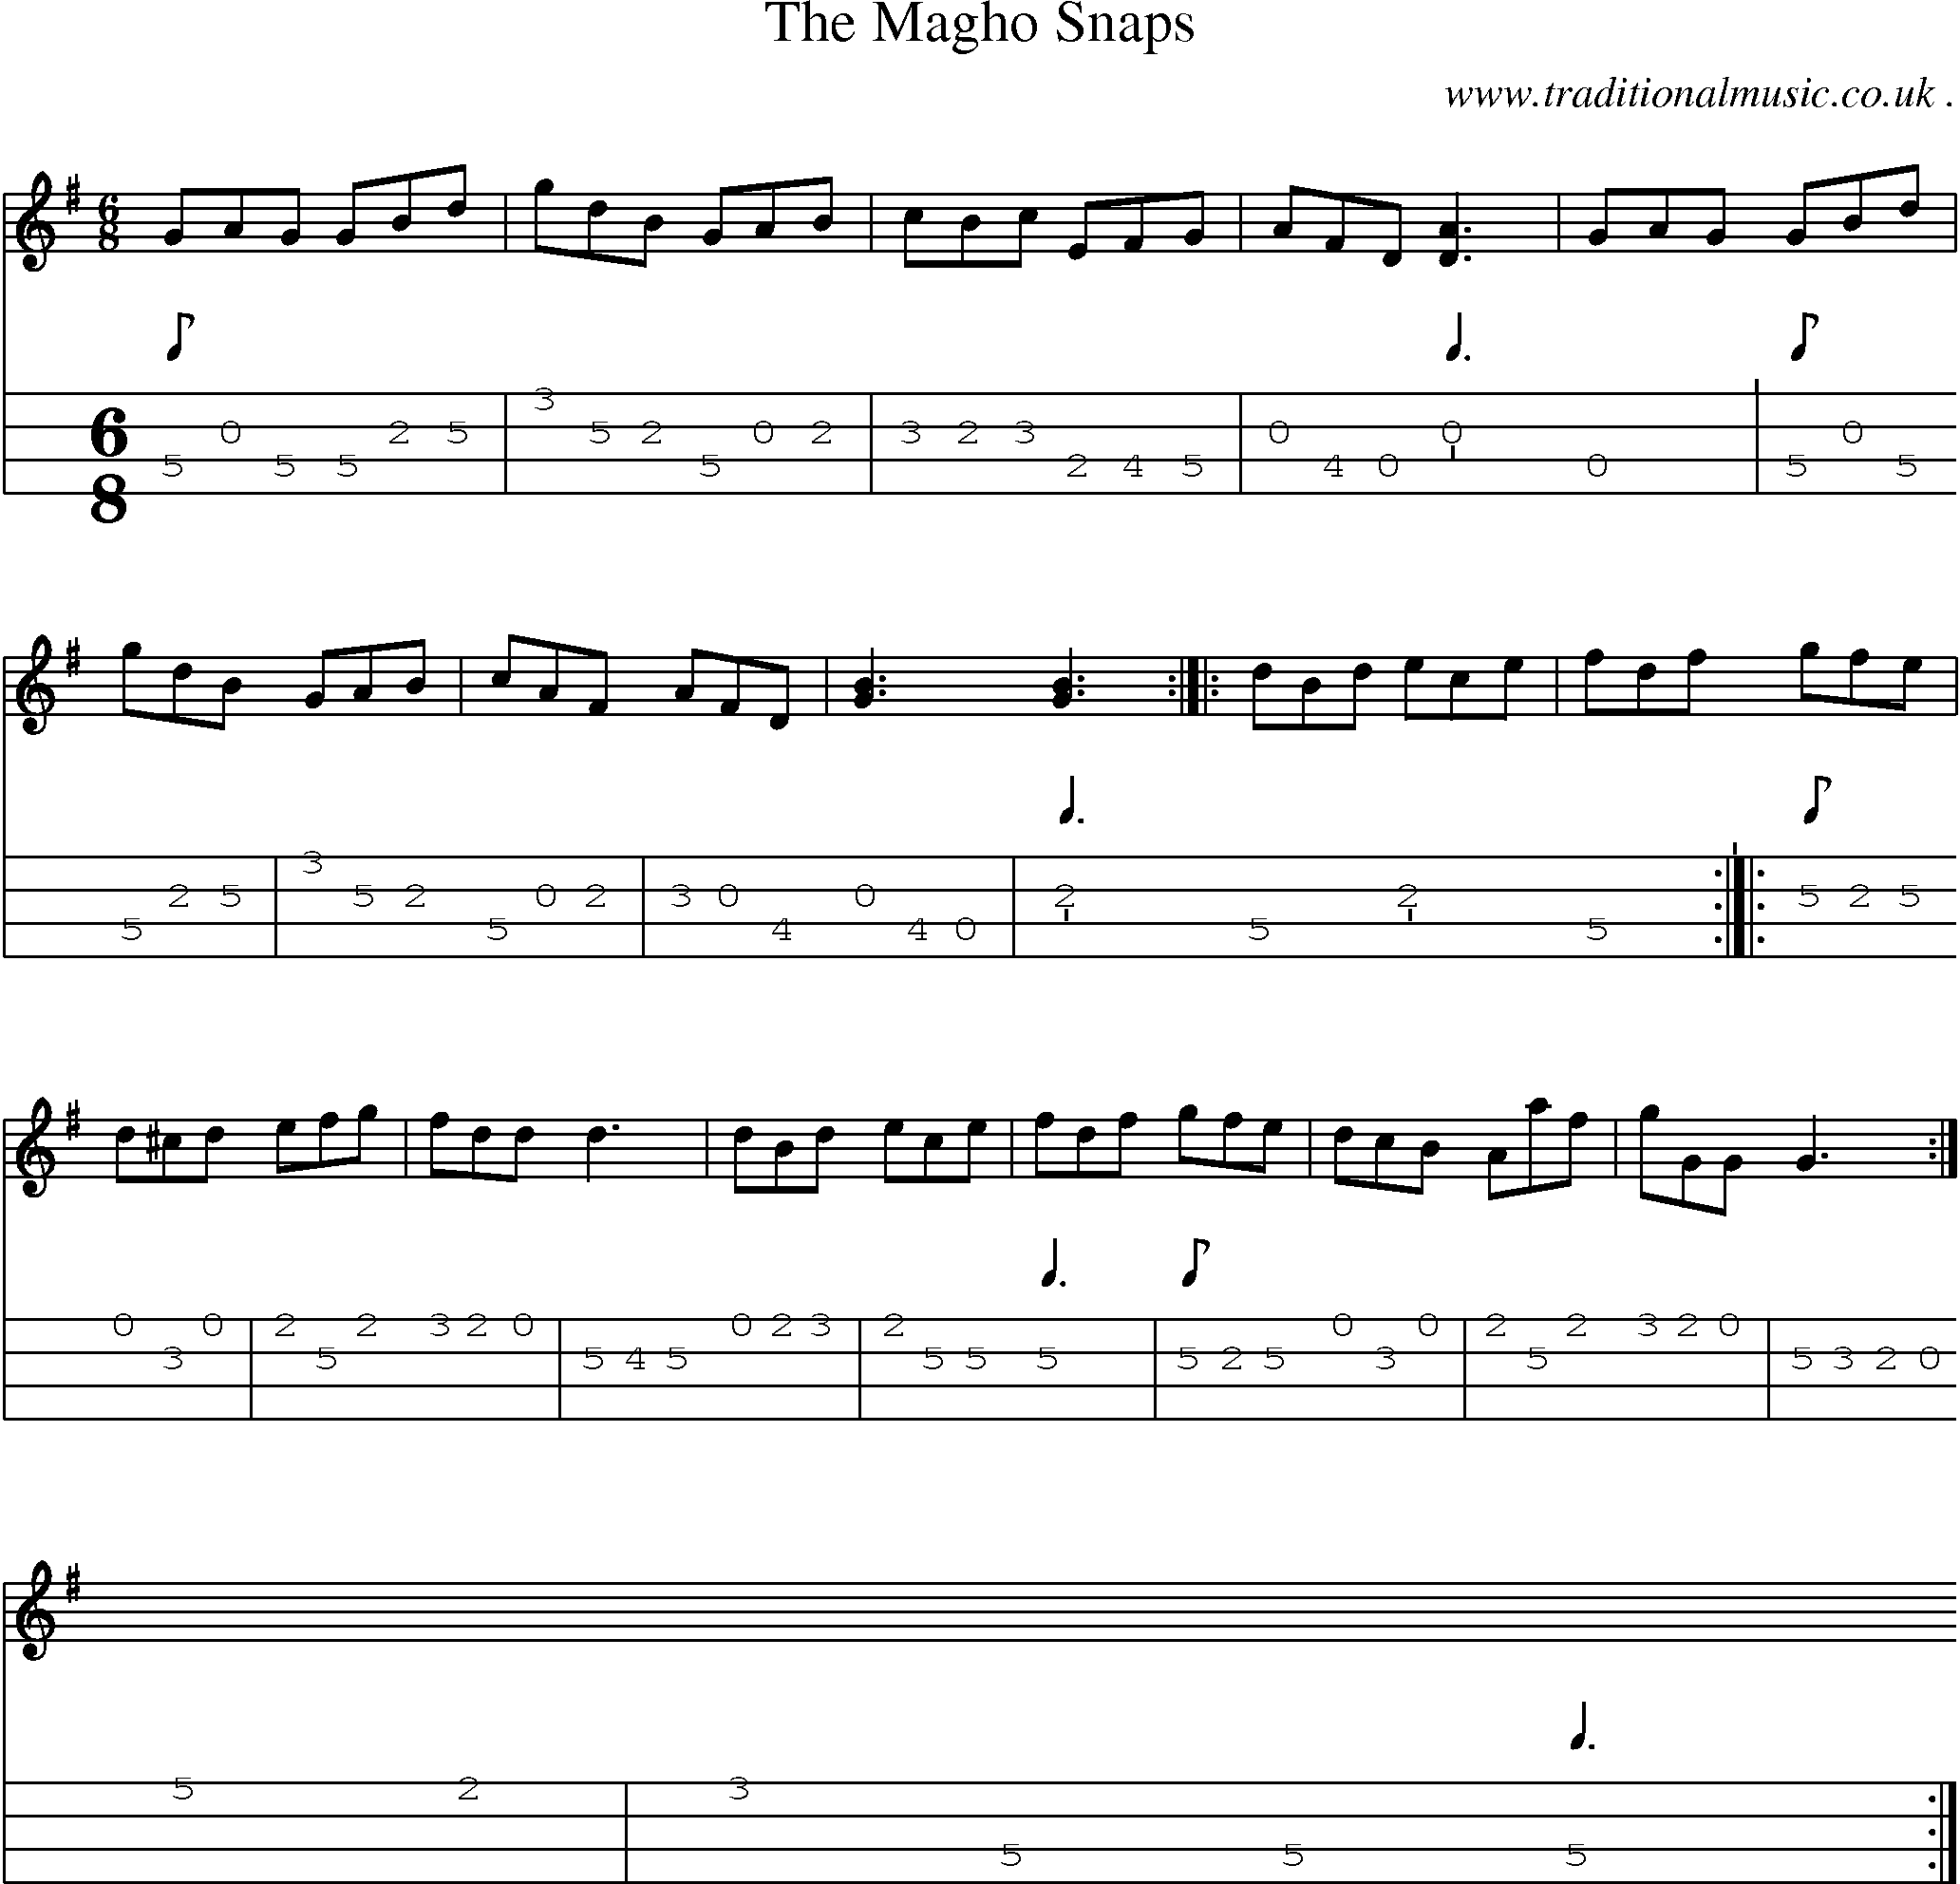 Sheet-Music and Mandolin Tabs for The Magho Snaps